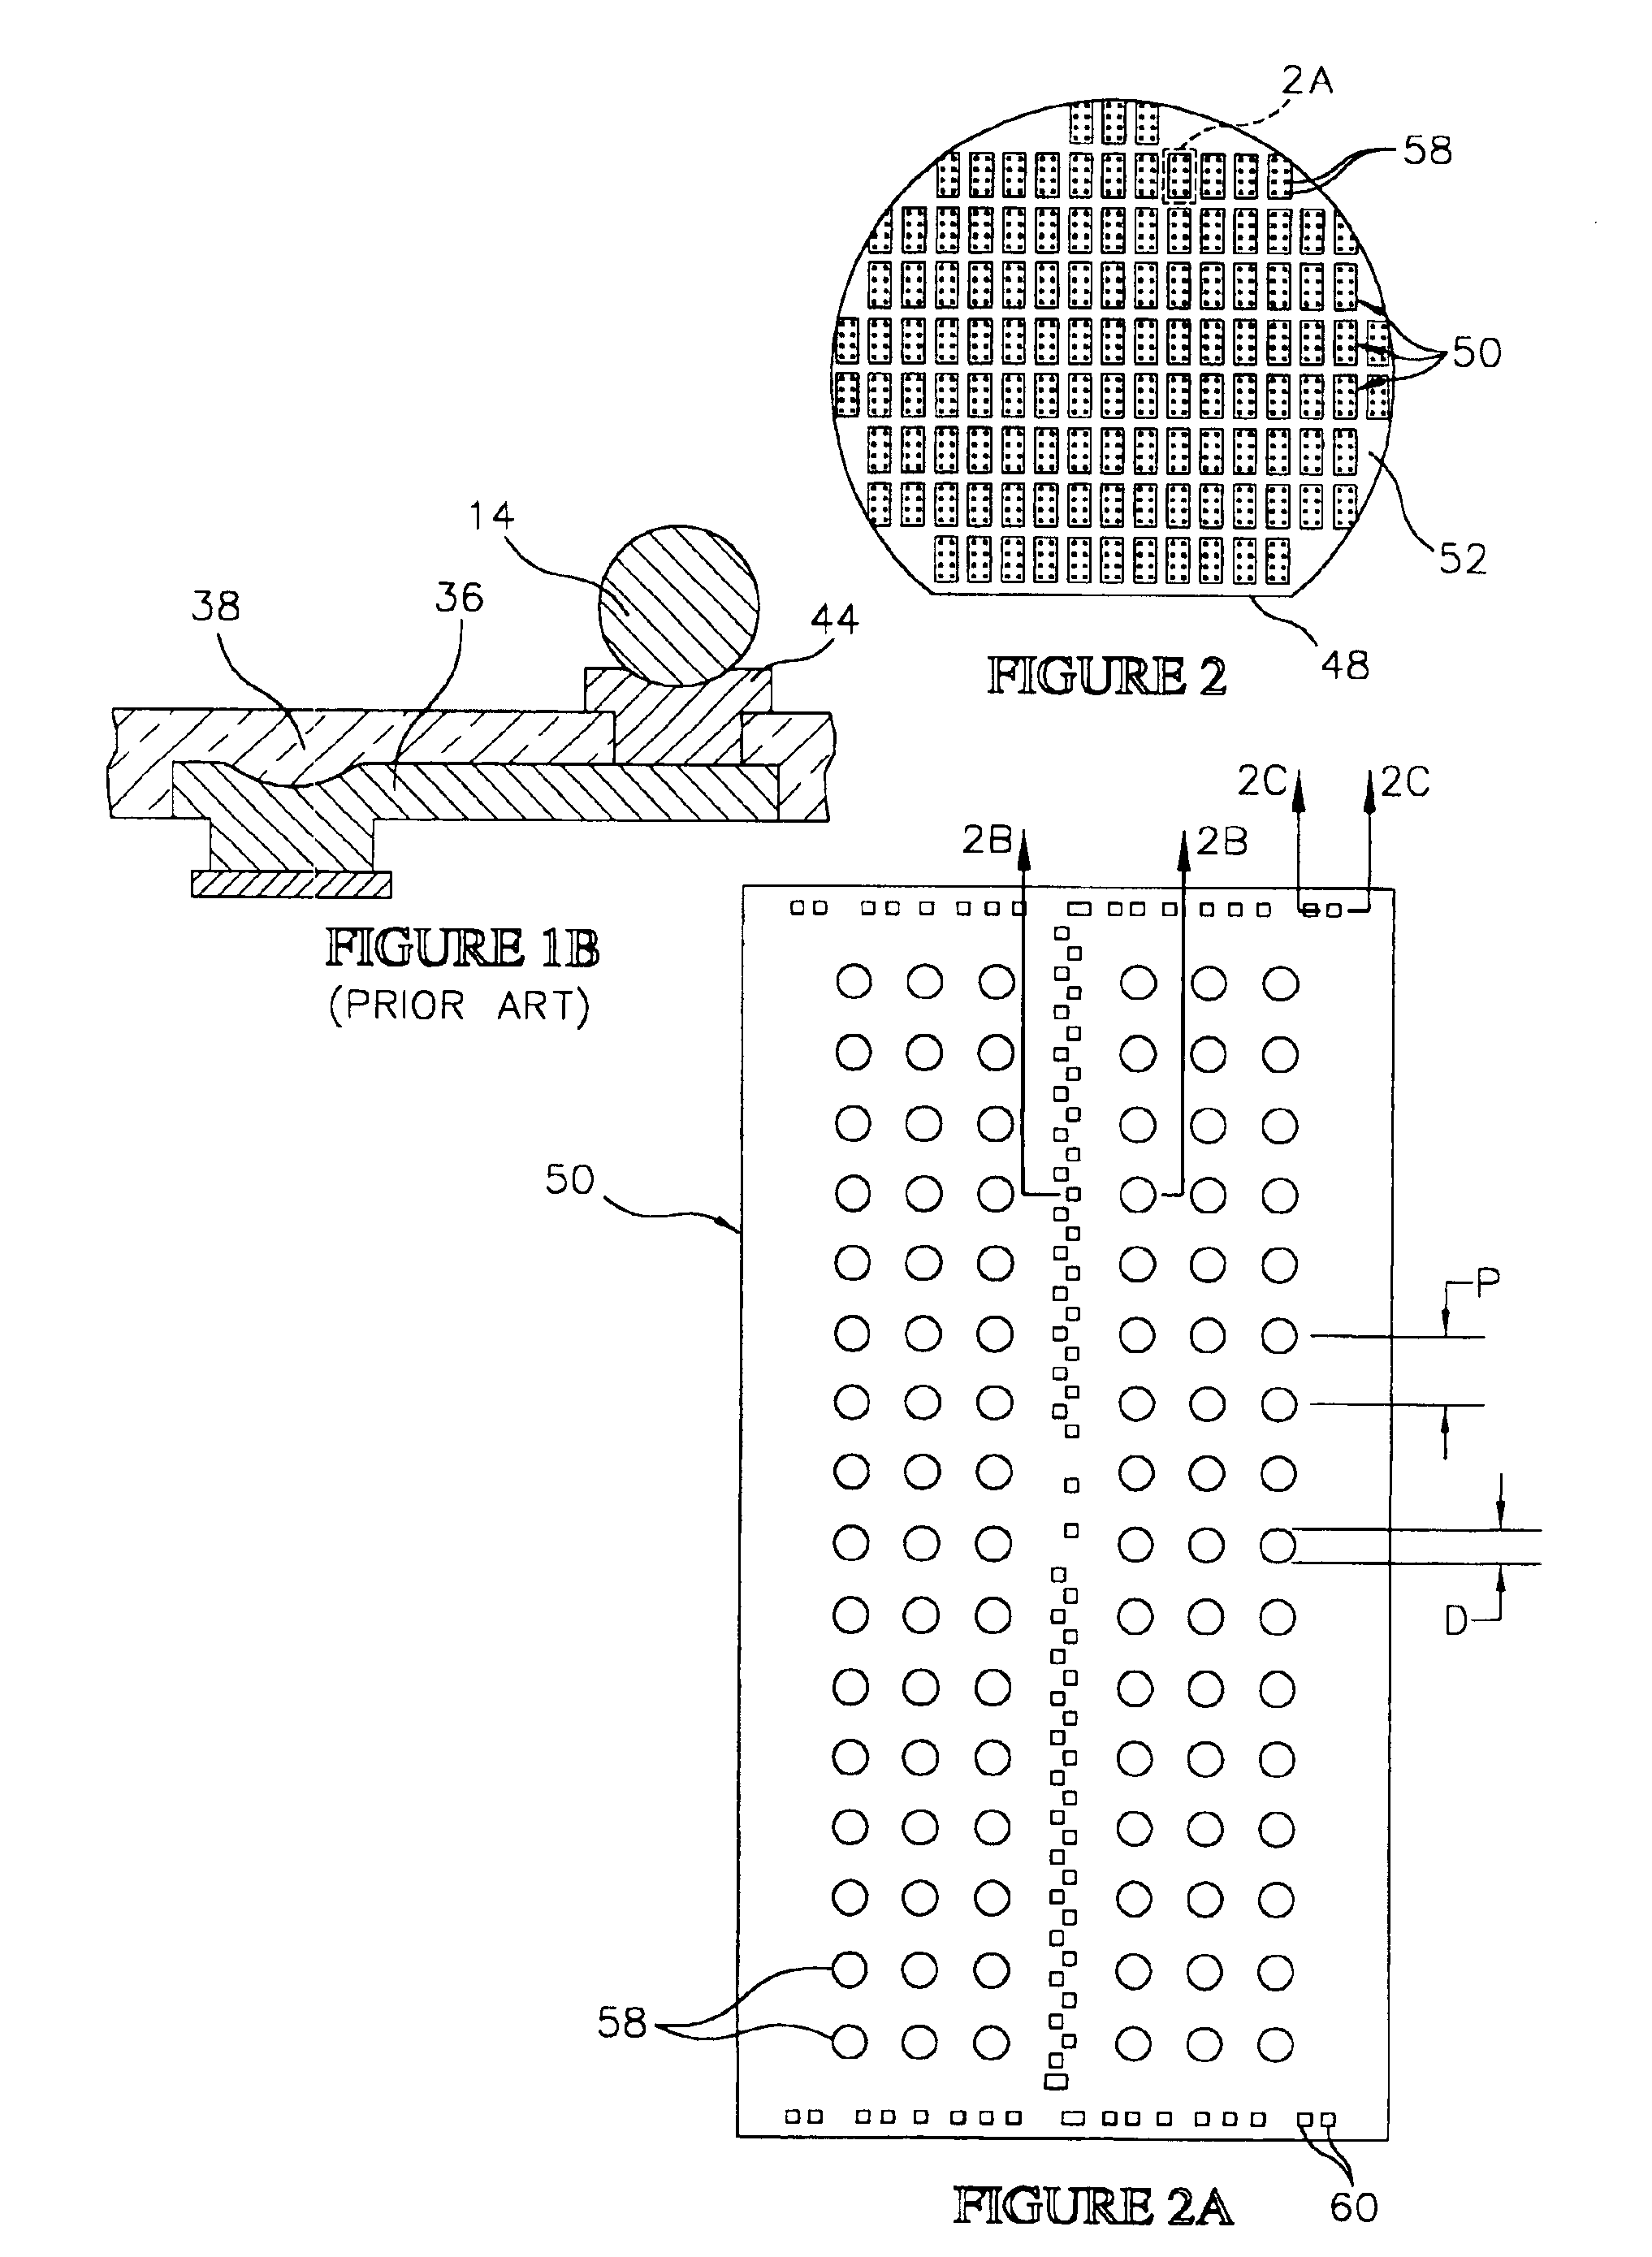 Semiconductor component with redistribution circuit having conductors and test contacts